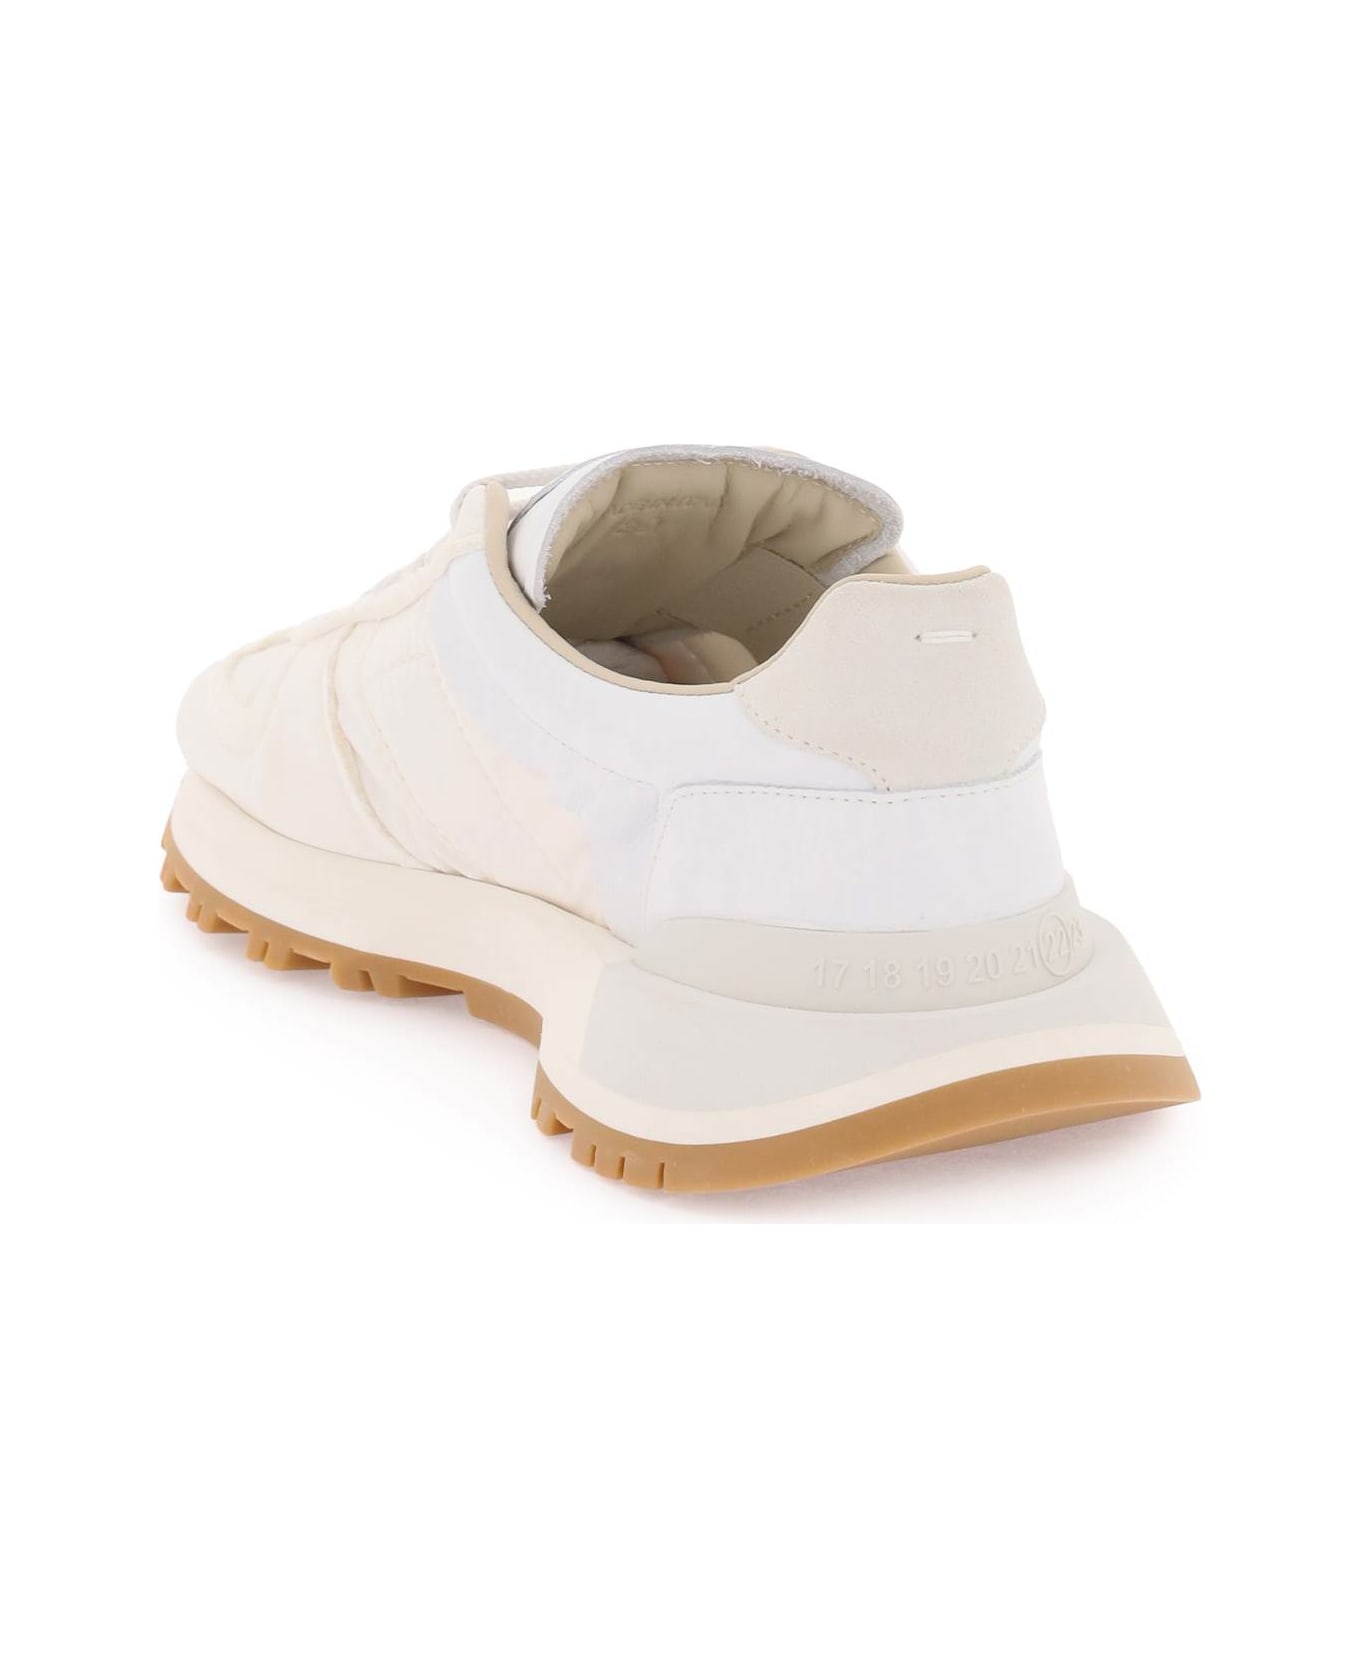 Maison Margiela Laced Low Sneakers - White